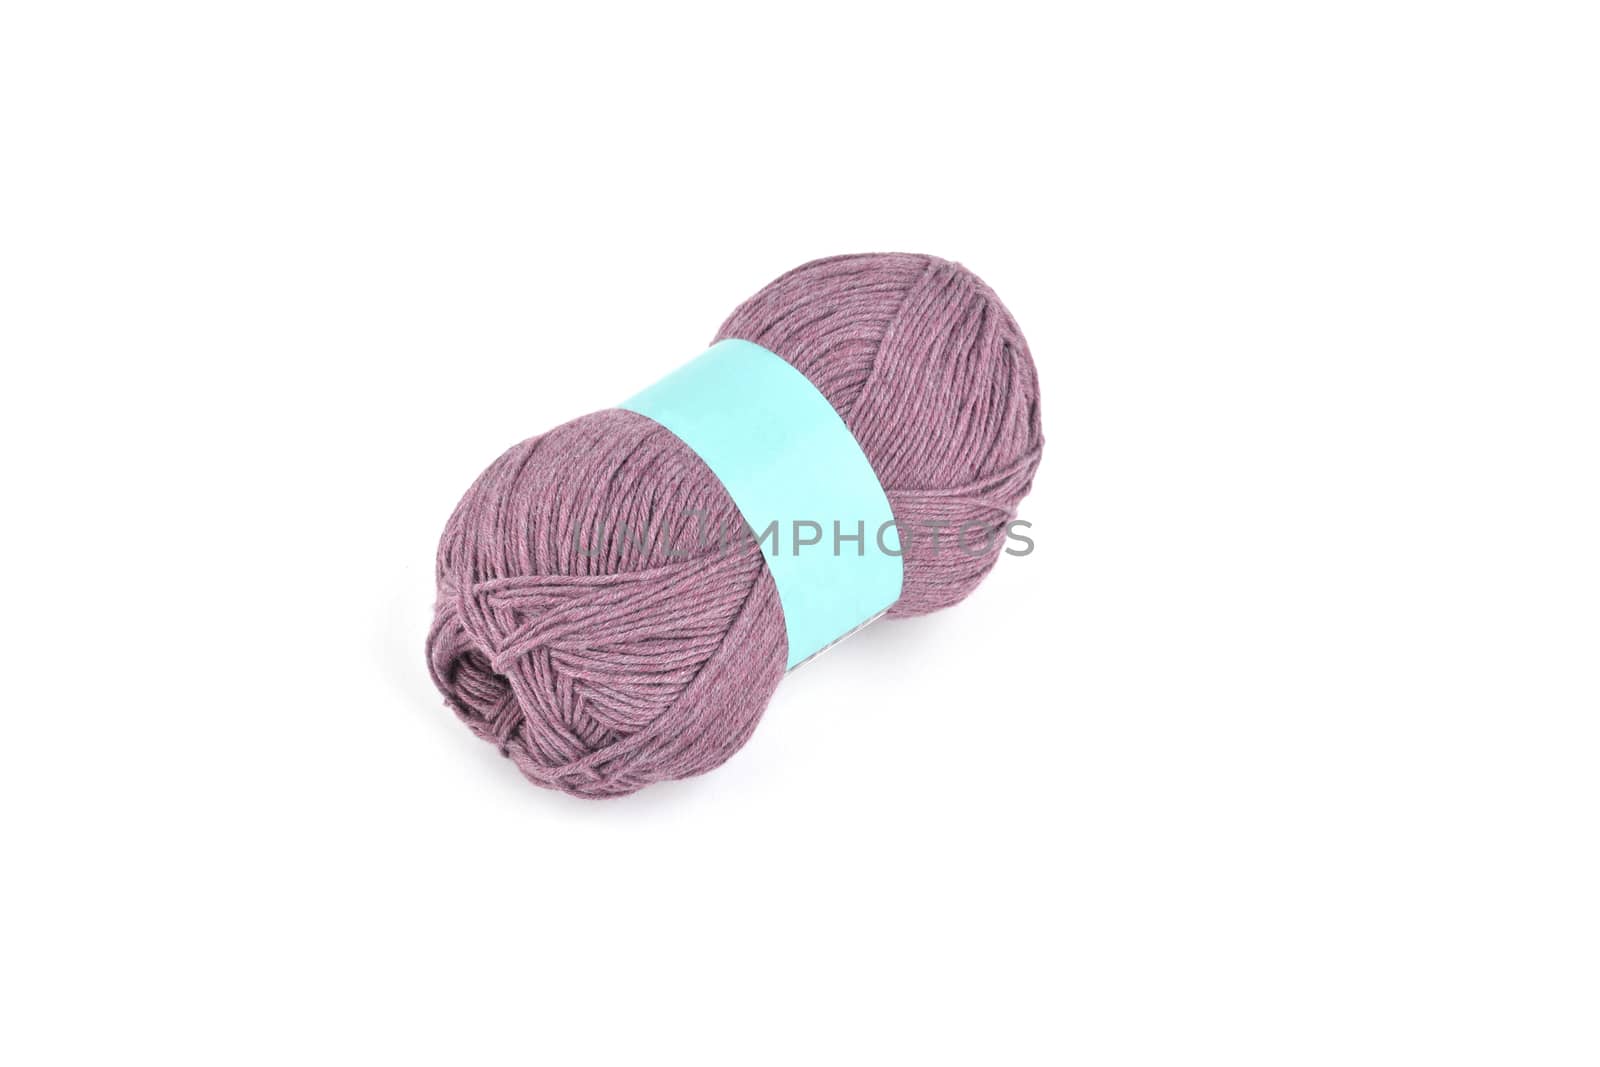 Tangle of color yarn with blank label on white background skein. Knitting isolated on white. Use for store